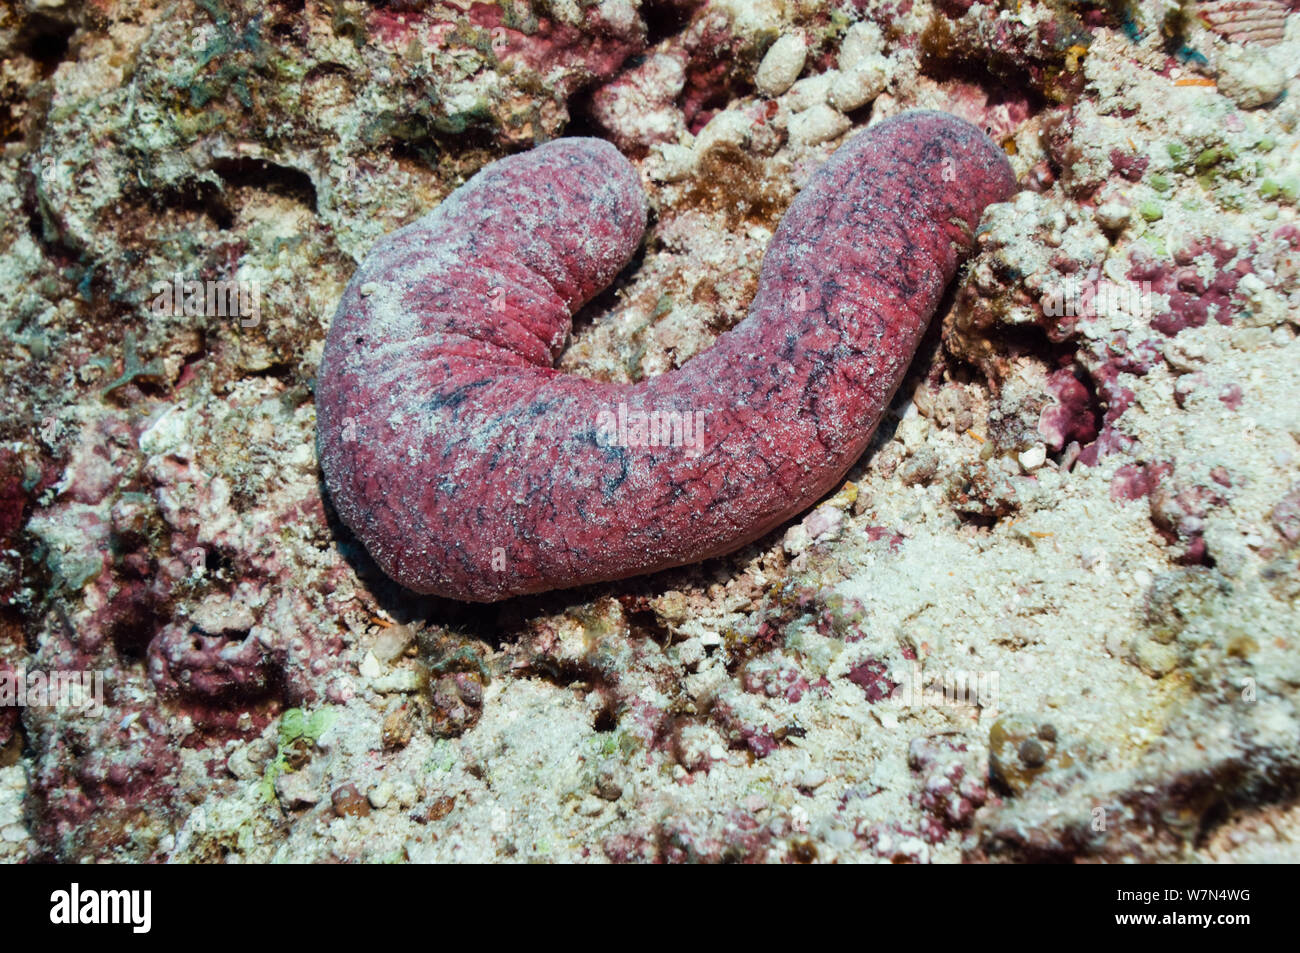 Edible sea cucumber (Holothuria edulis) one of the edible species of ...